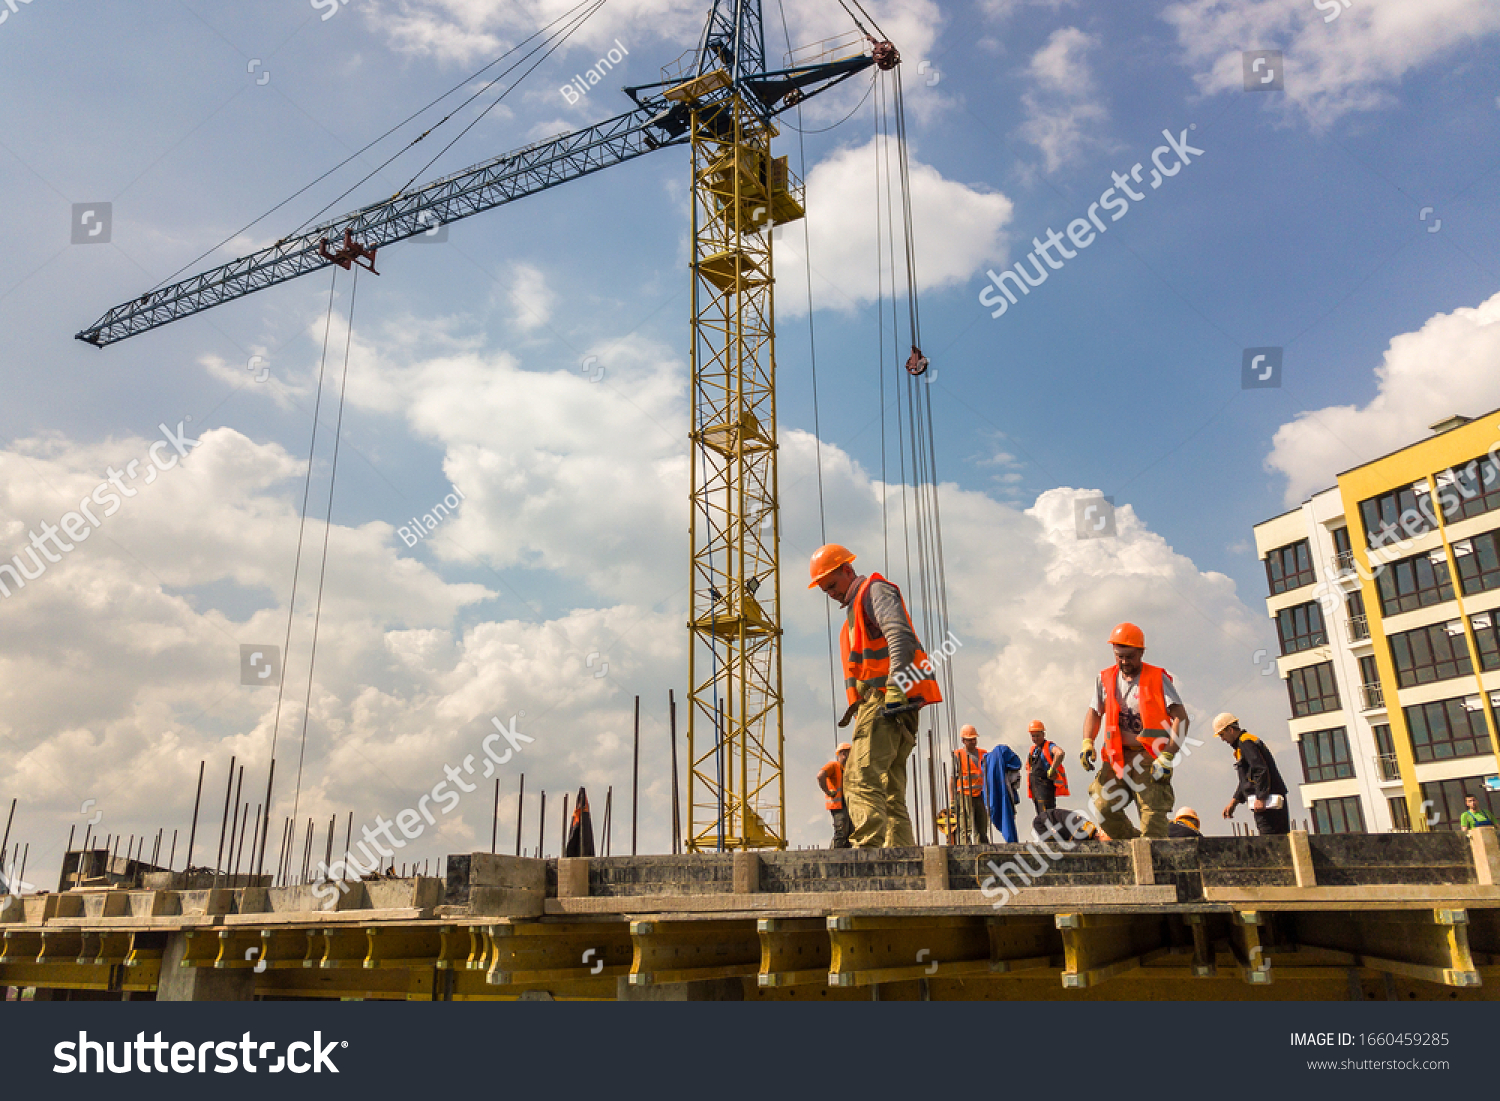 Kyiv, Ukraine - May 3, 2019: Workers working on concrete frame of tall apartment building under construction in a city. #1660459285